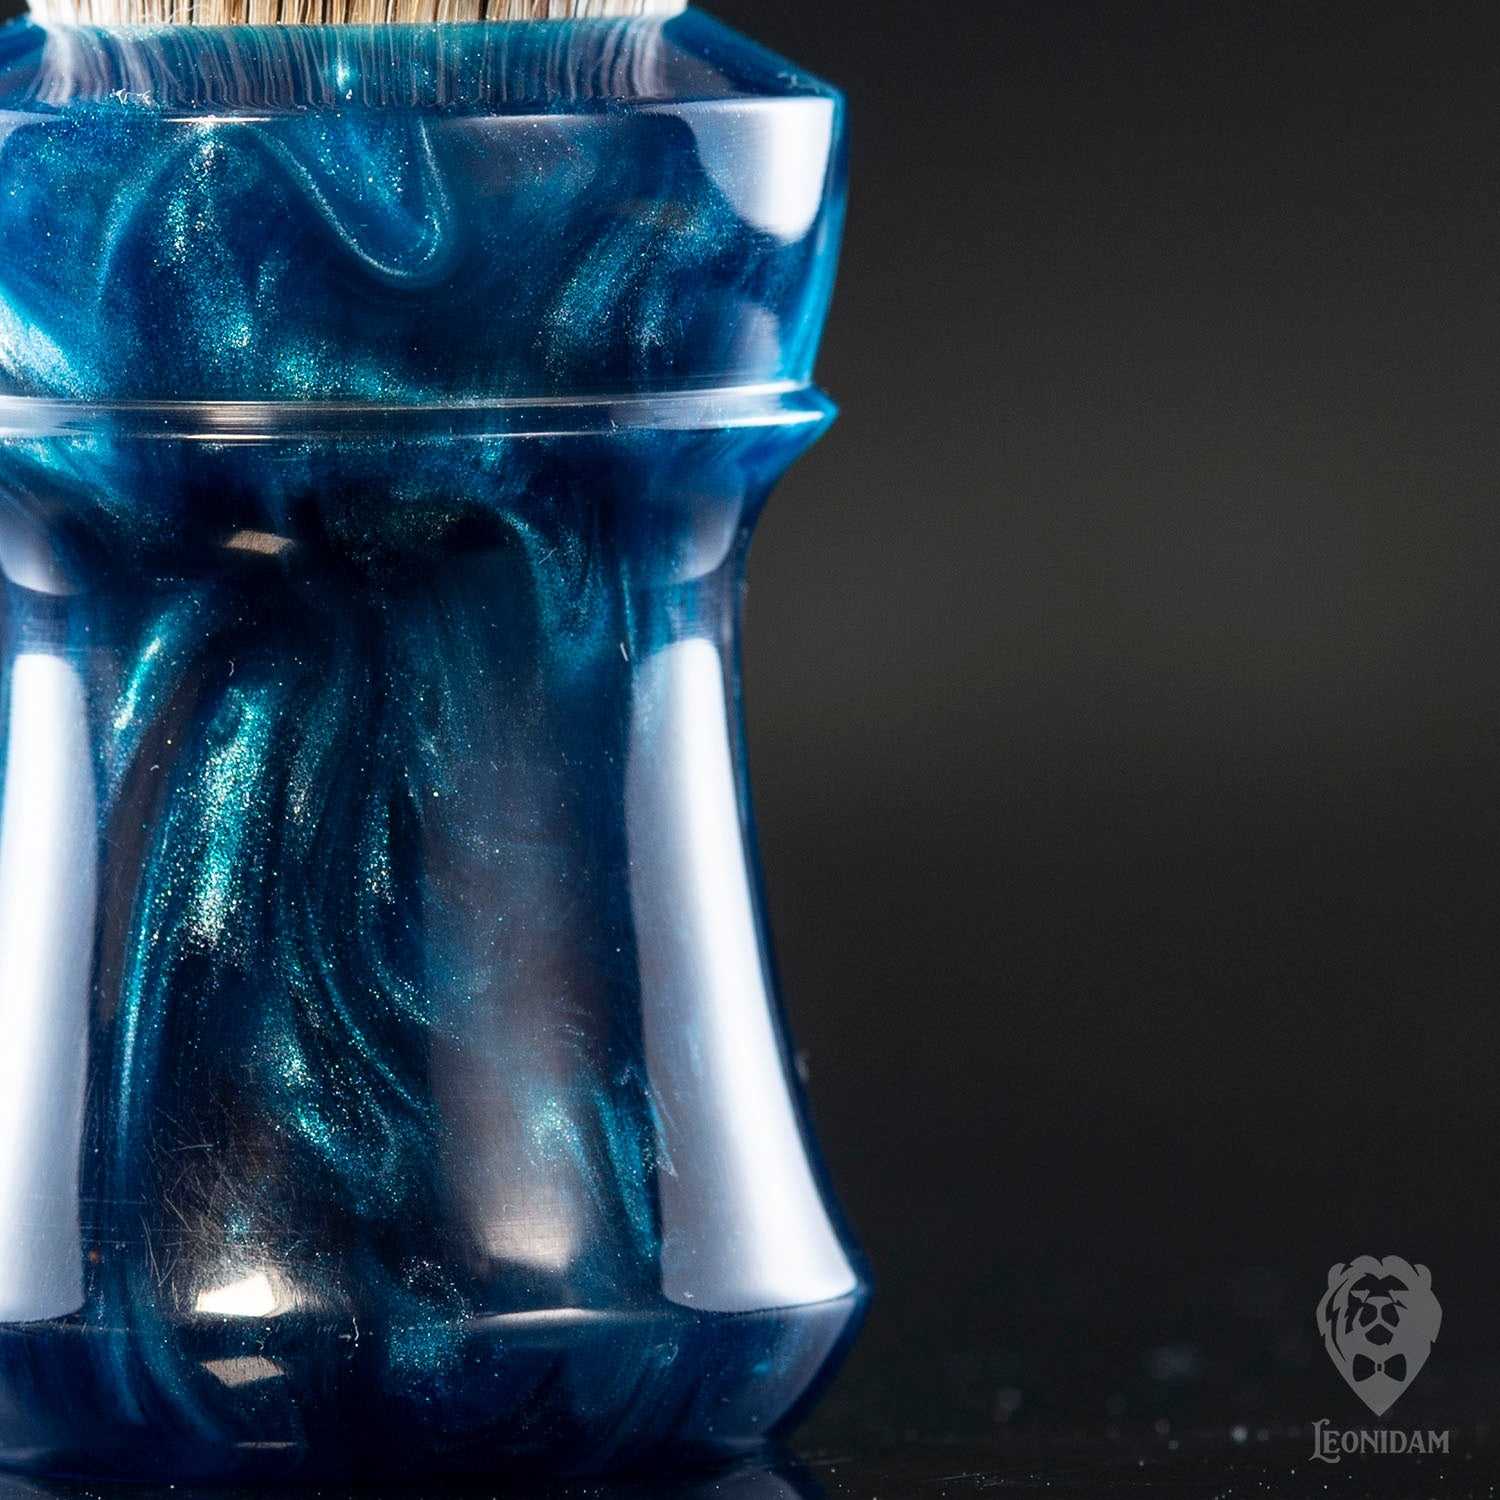 Handmade Shaving Brush "Nautilus" in polished blue and silver resin